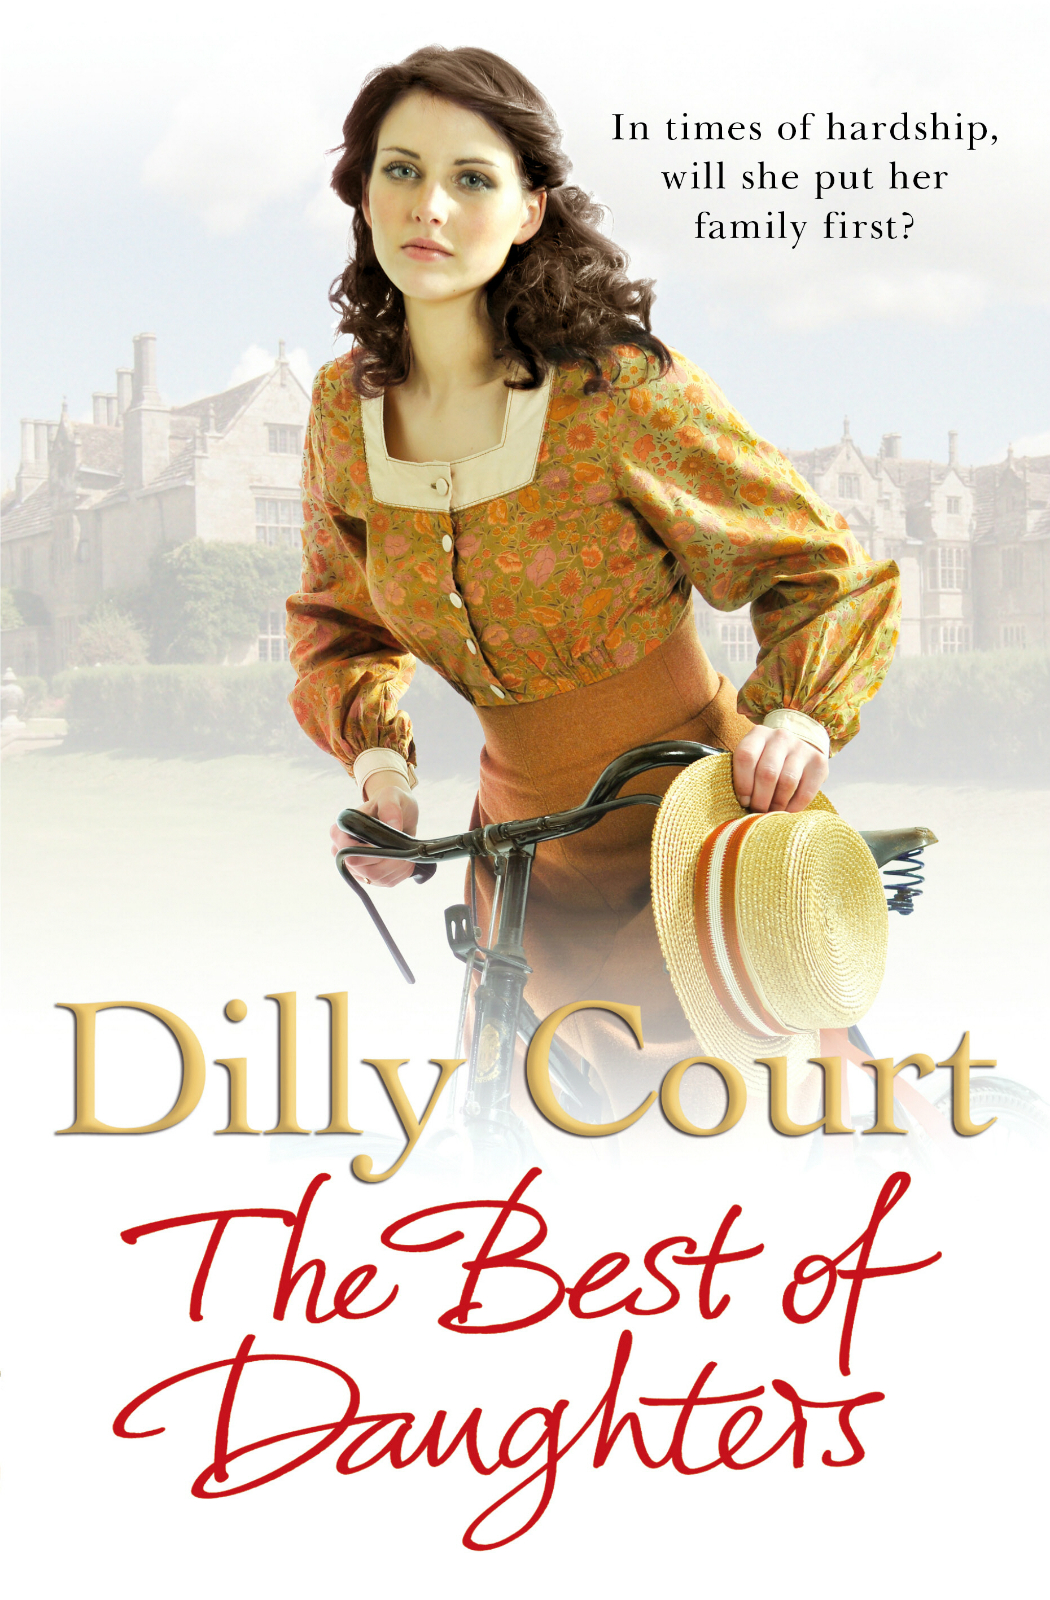 The Best of Daughters (2012) by Dilly Court